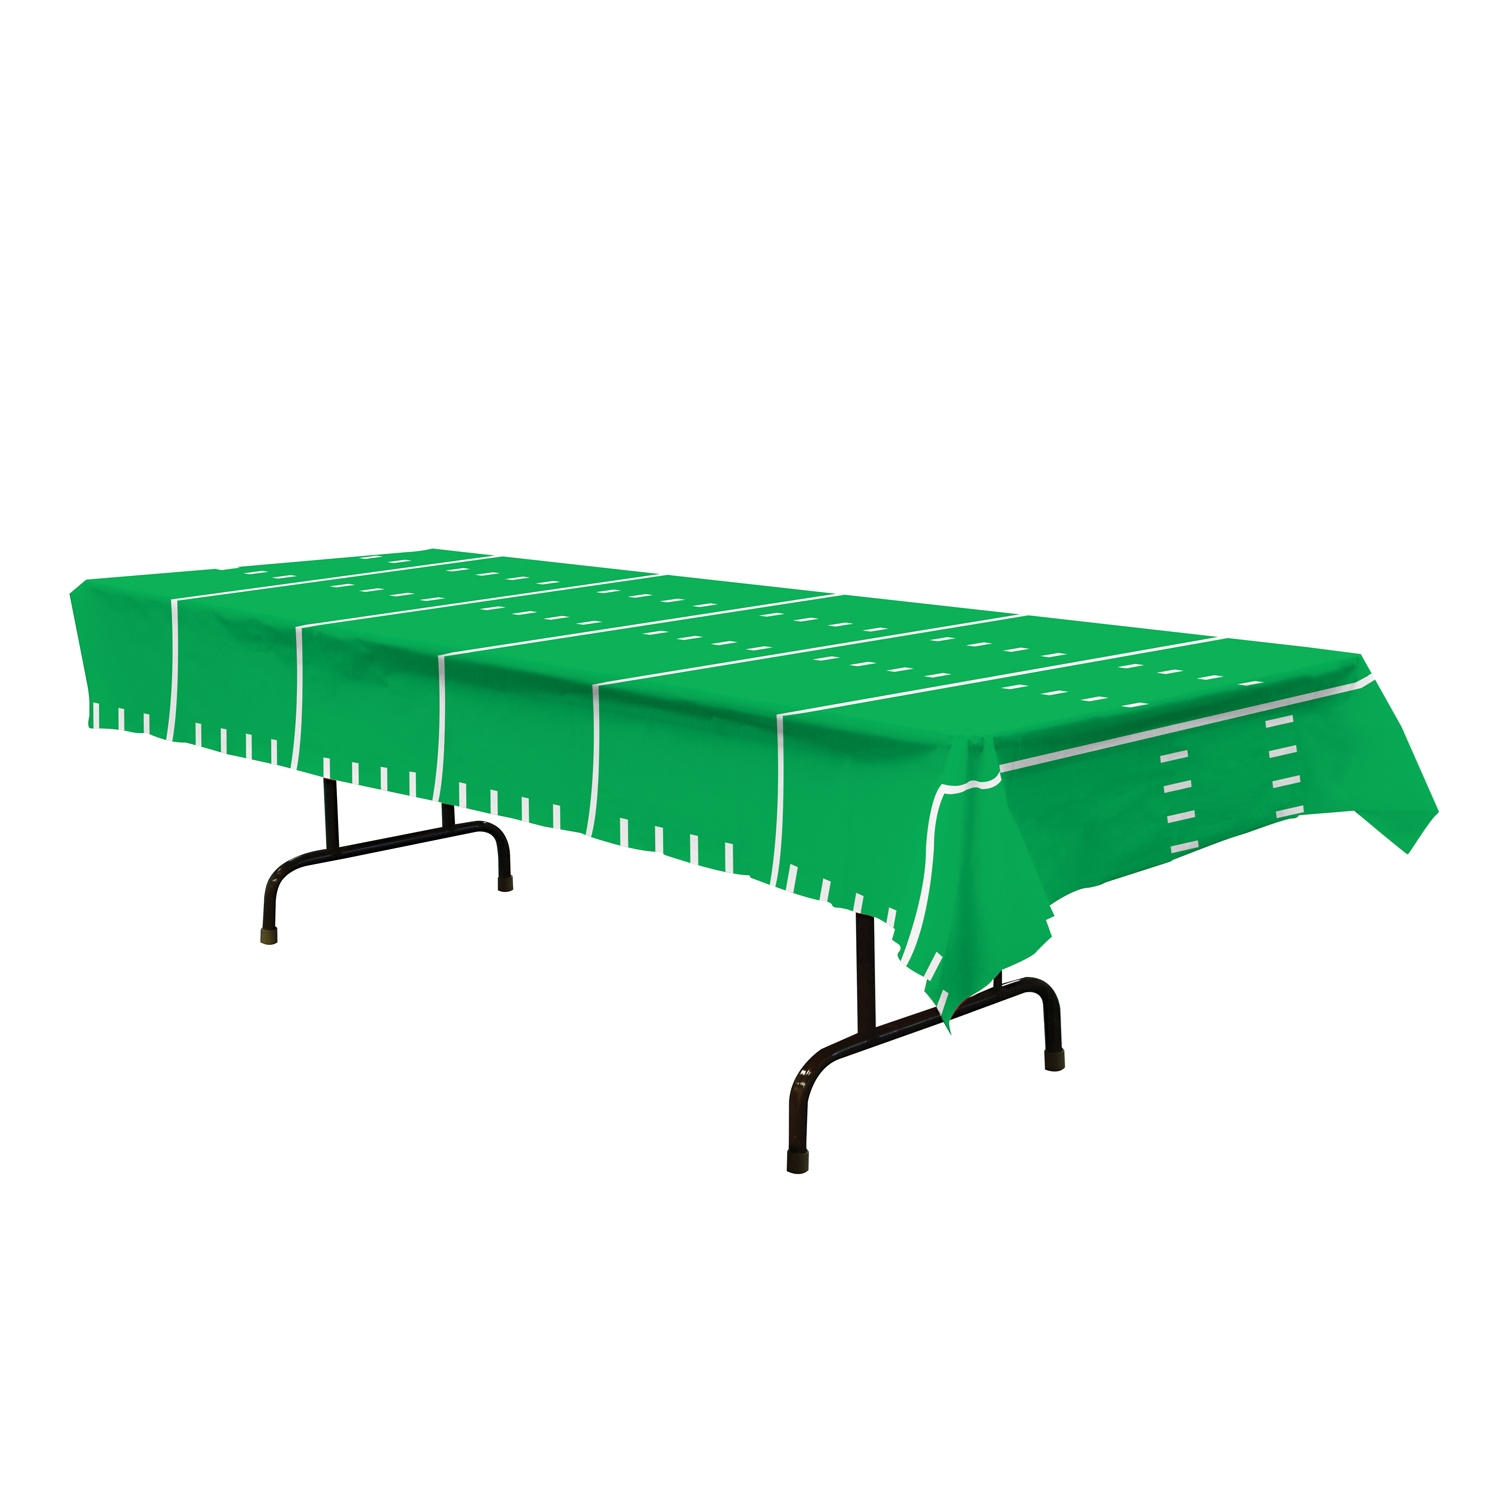 green plastic table cover that looks like a football field